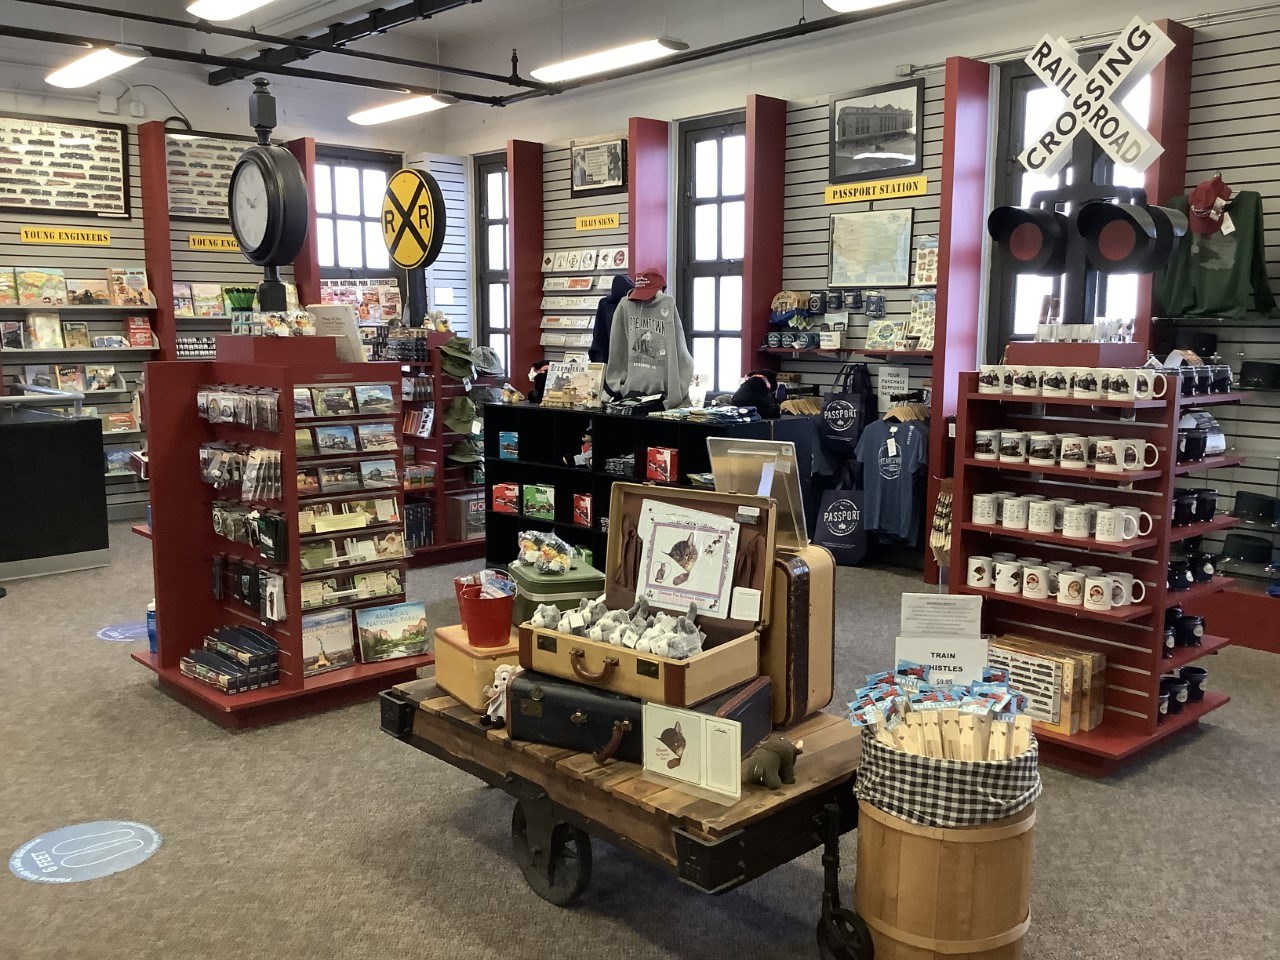 interior view of park store showing several displays of souvenirs